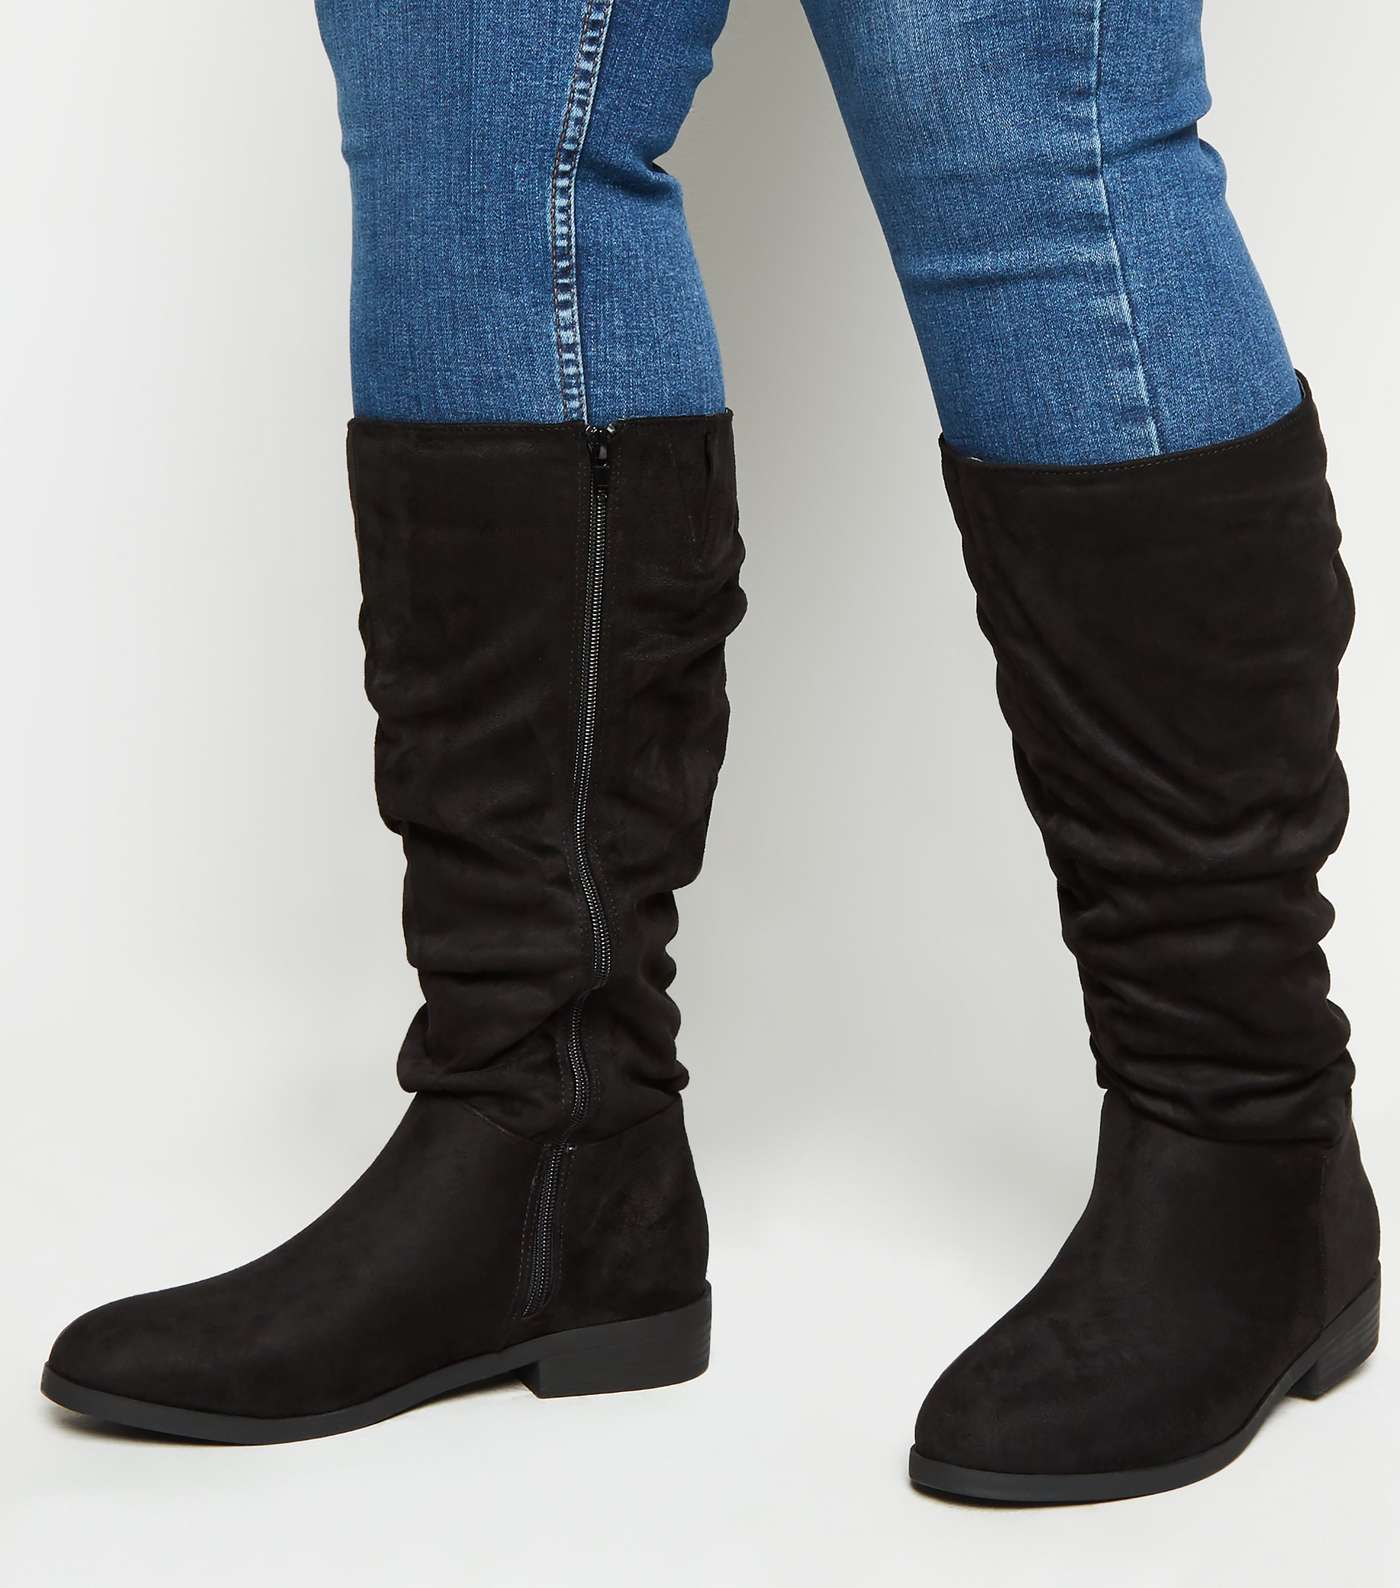 Extra Calf Fit Black Suedette Knee High Boots Image 2